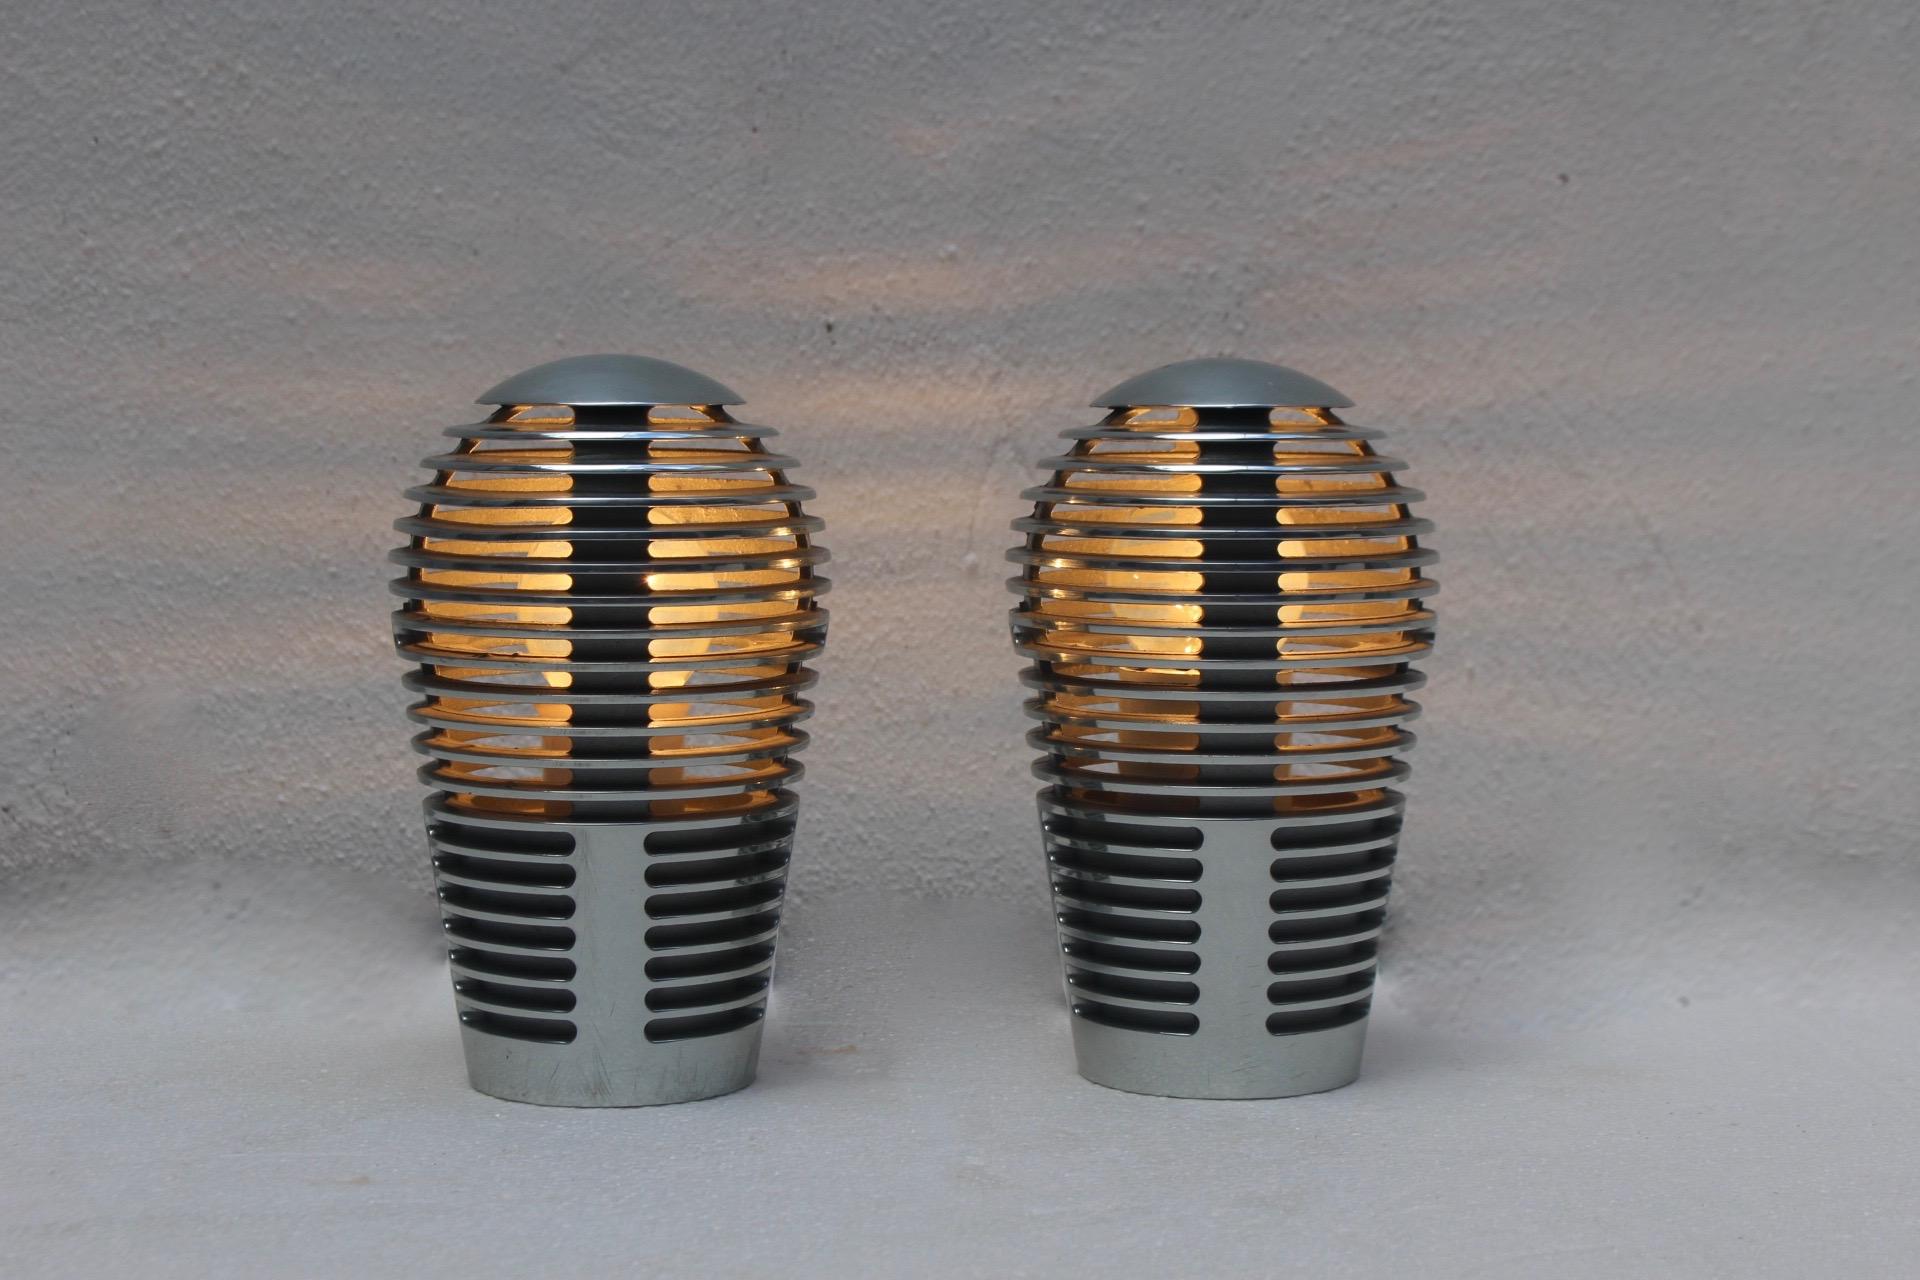 Iconic and sculptural pair of Postmodern Zen table lamps designed in Barcelona, Spain in 1984 by the Devesa Brothers, Sergi and Oscar for Metalarte.
They have been re-electrified.
The set remains in very good vintage condition, with only a few